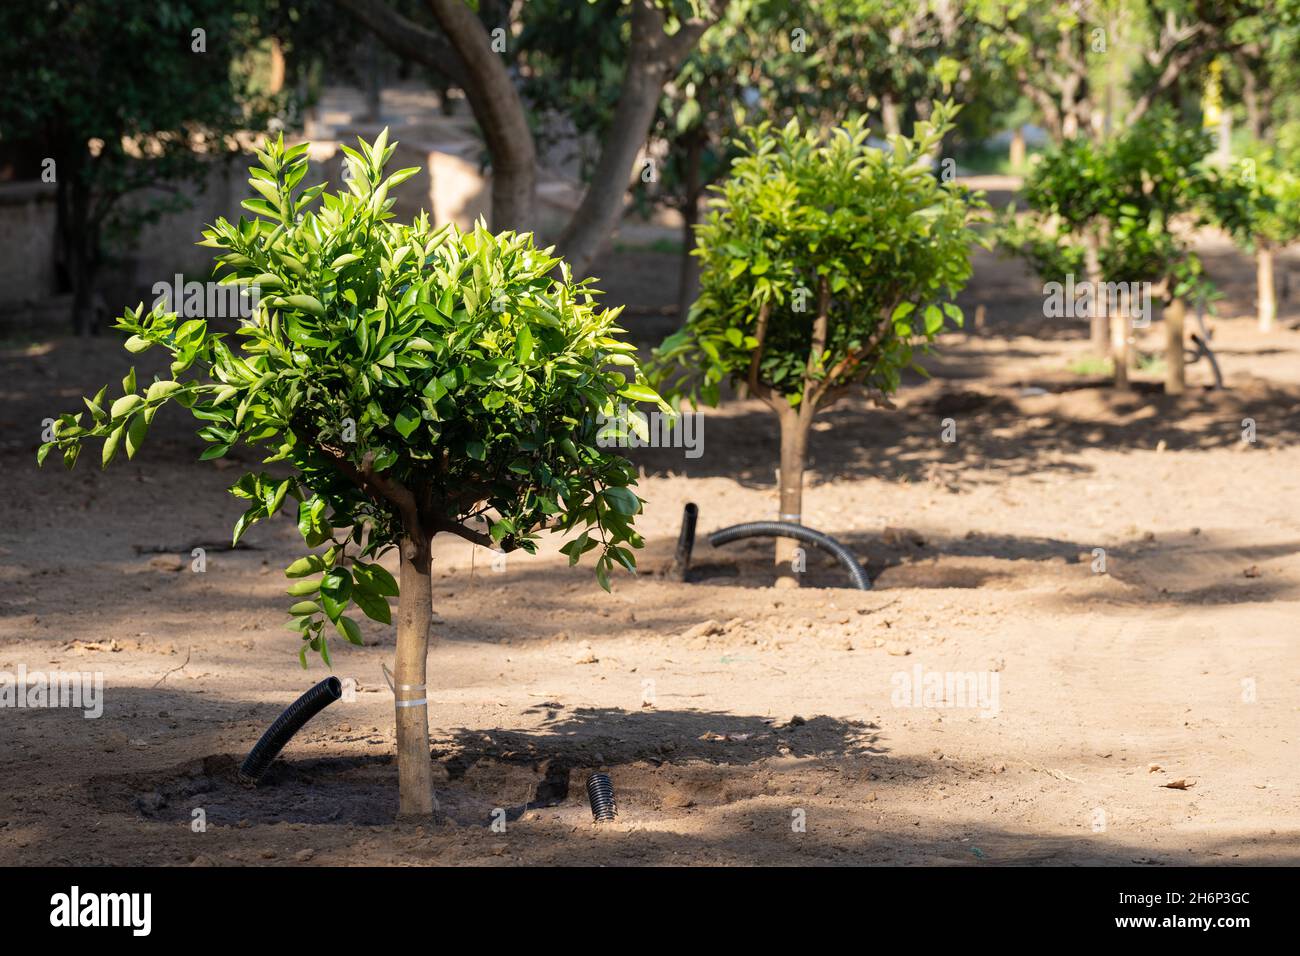 Planting trees in the park. Earth, nature, environment and ecology concept Stock Photo